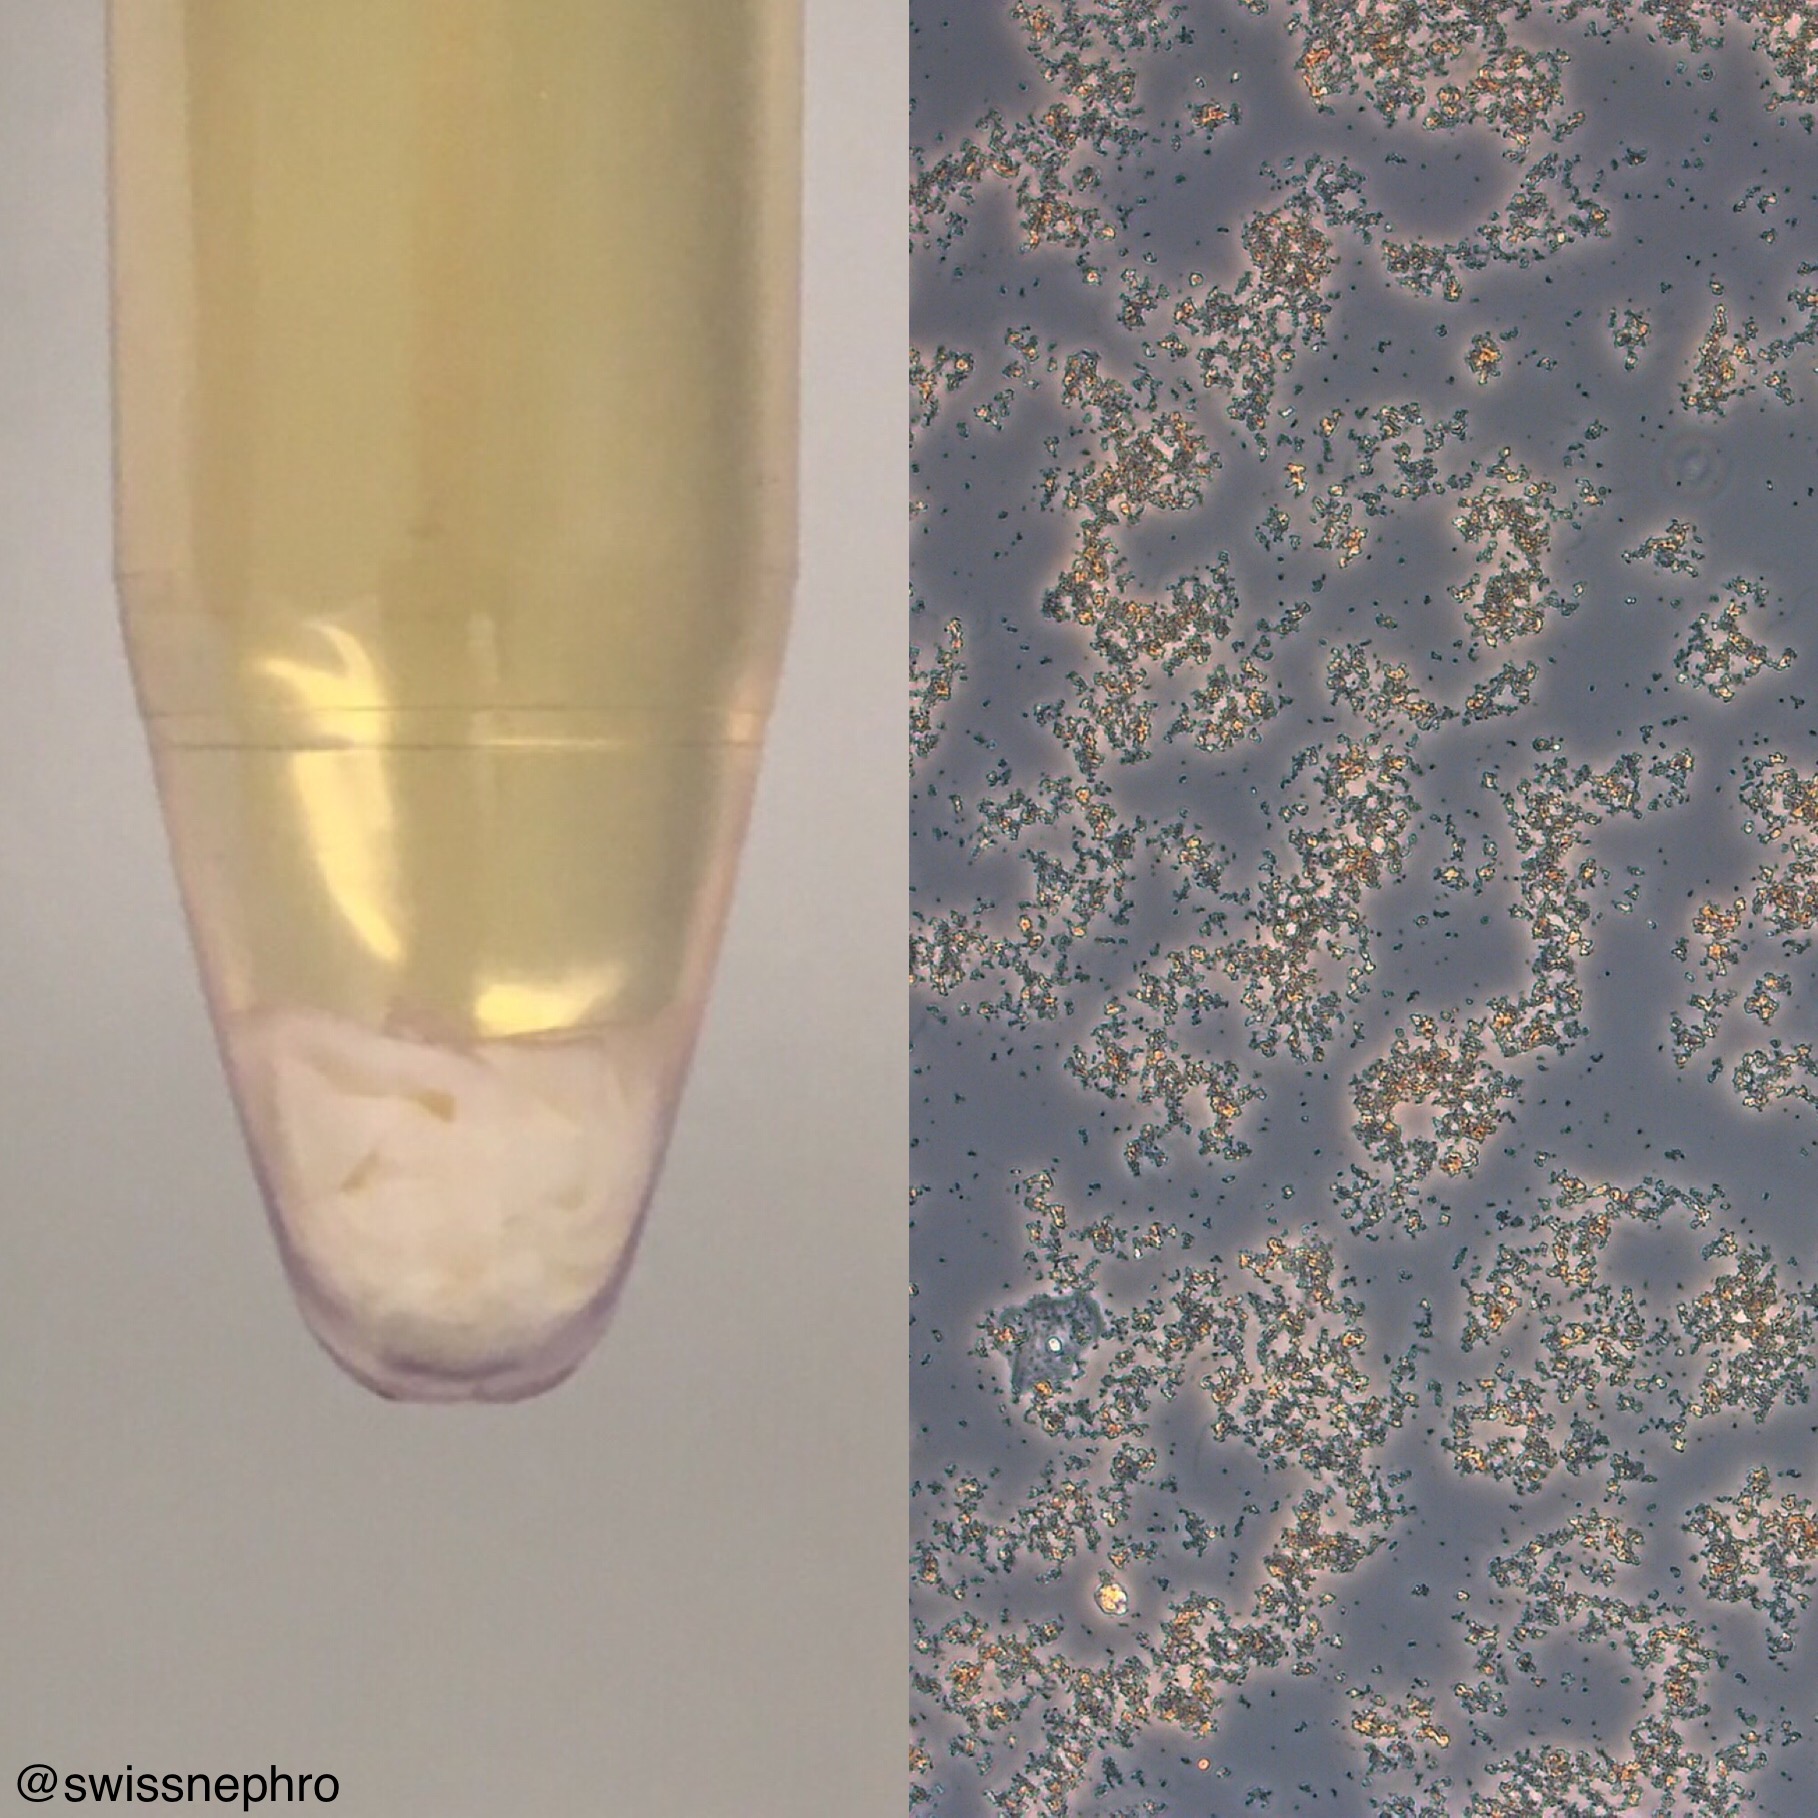 Urine Sediment Of The Month The Visible Sediment Renal Fellow Network 2560